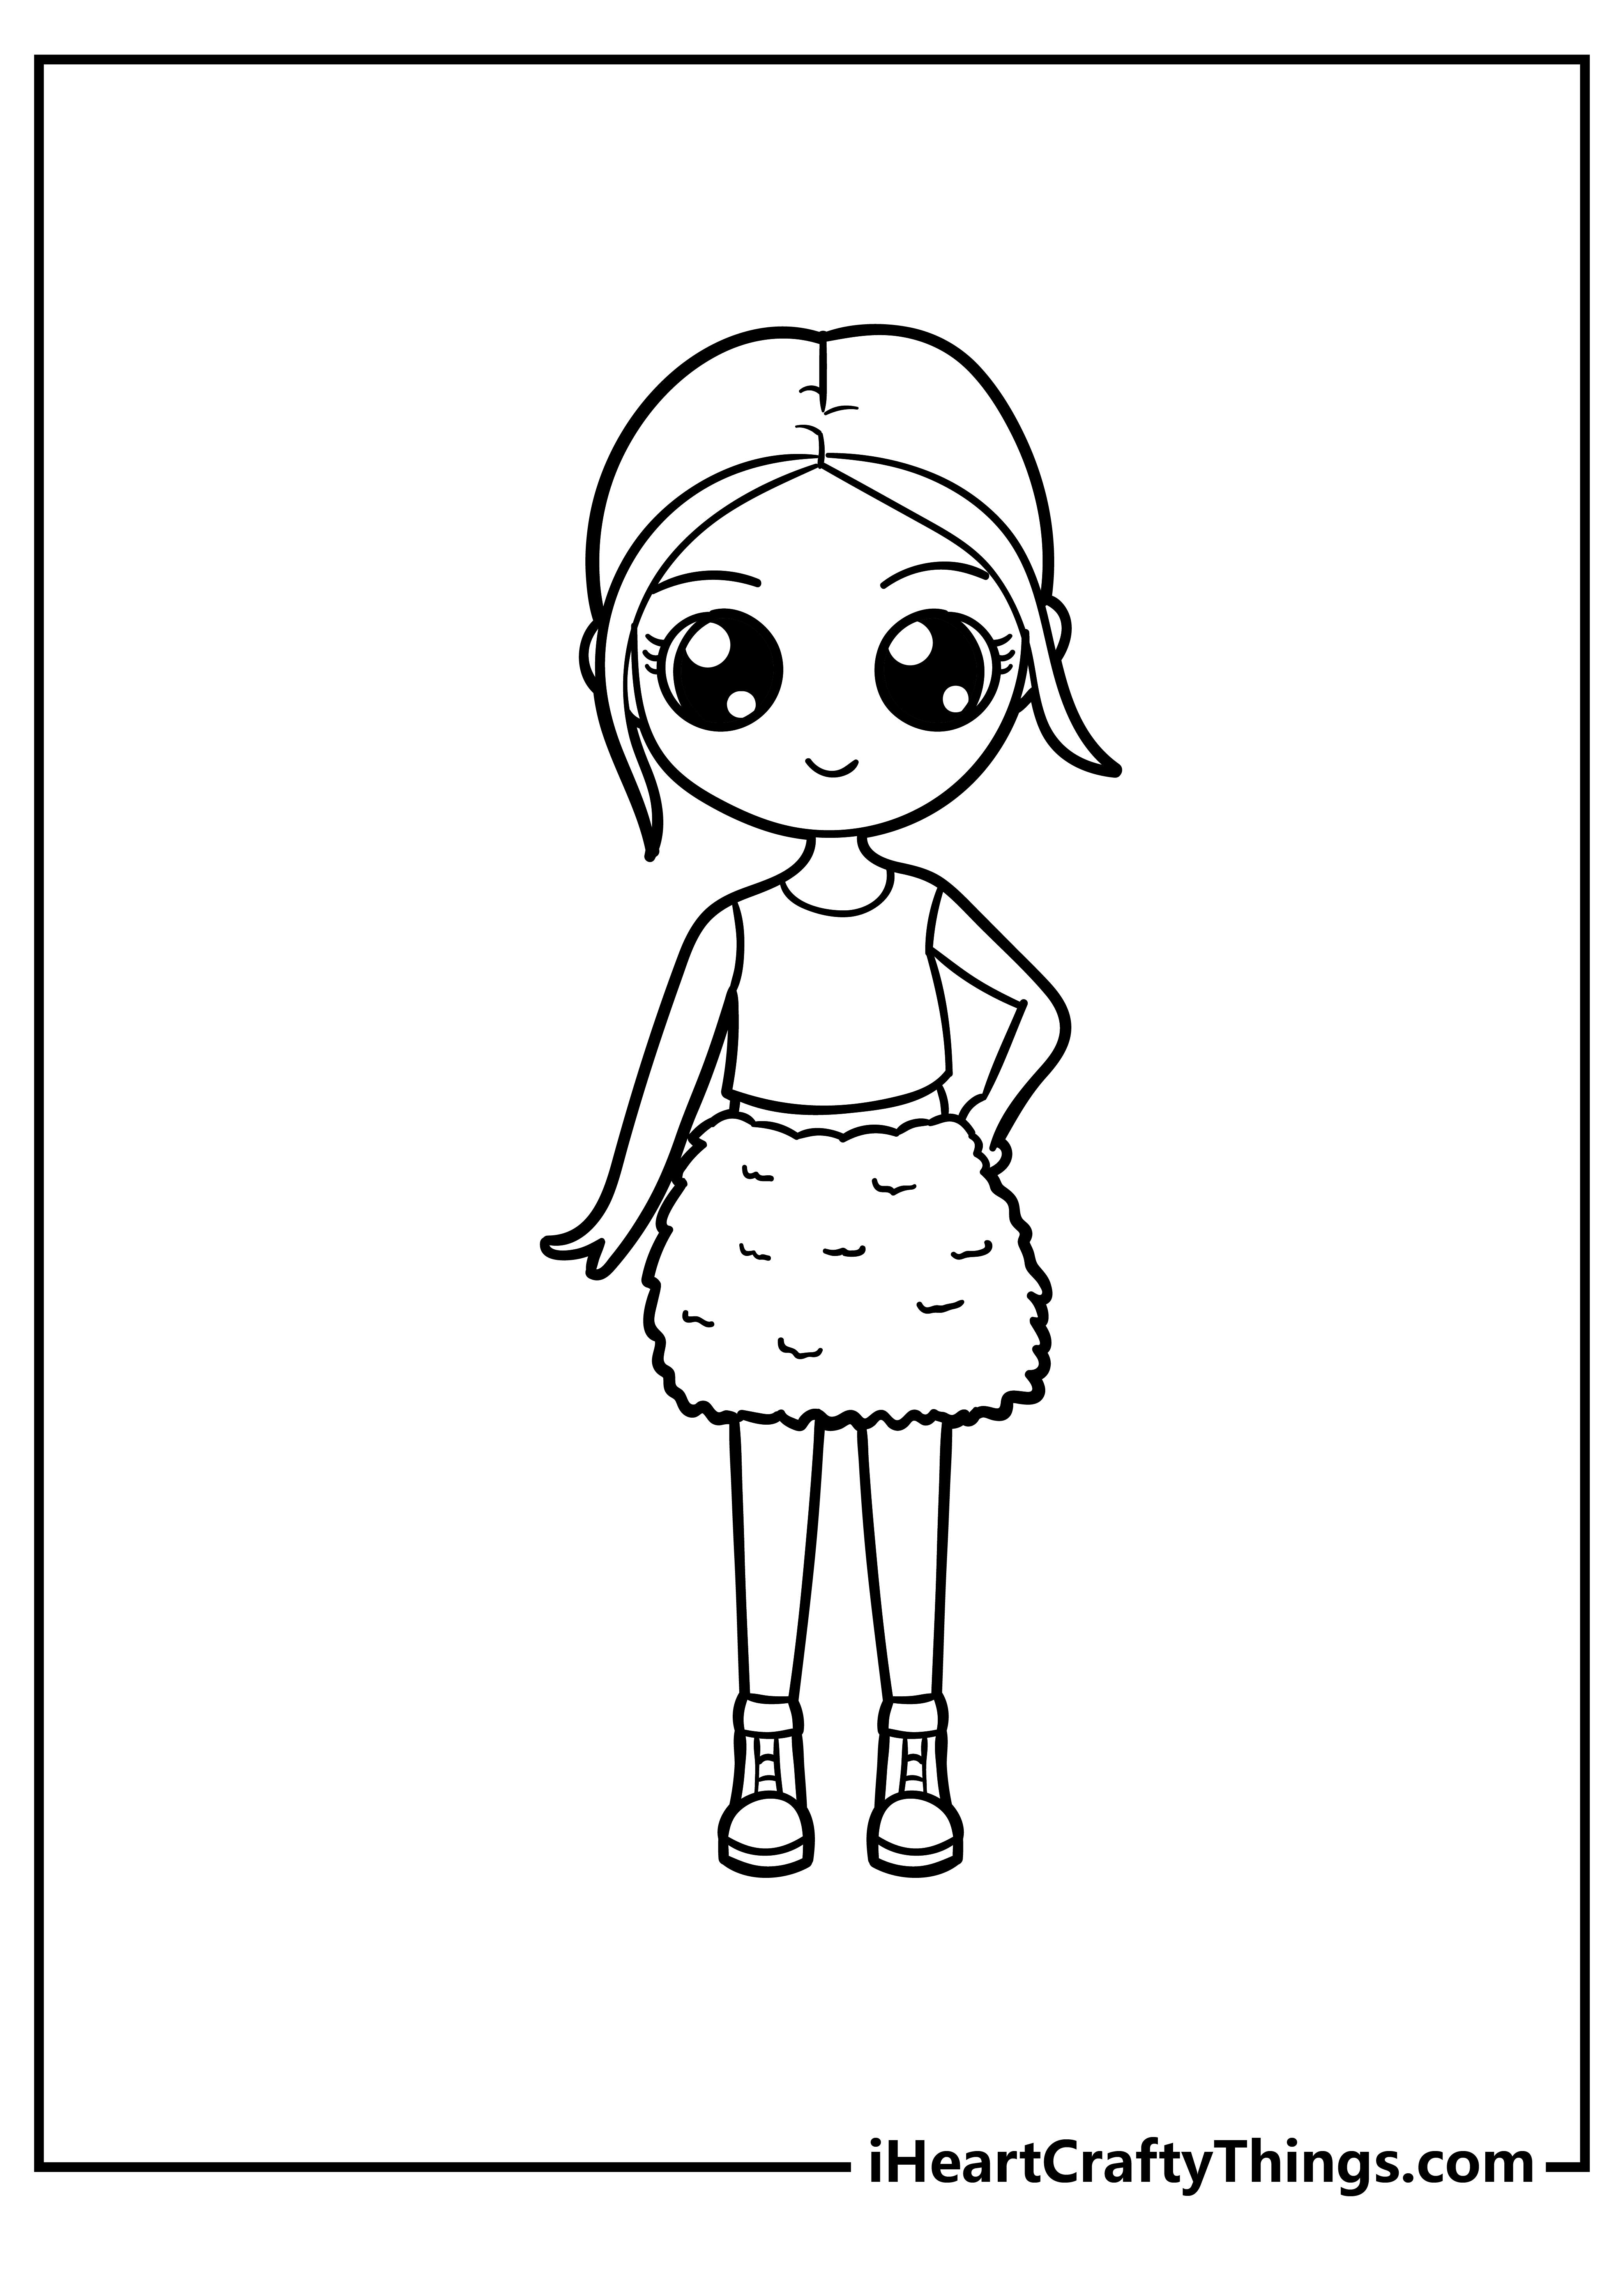 Coloring Pages For Girls free printable